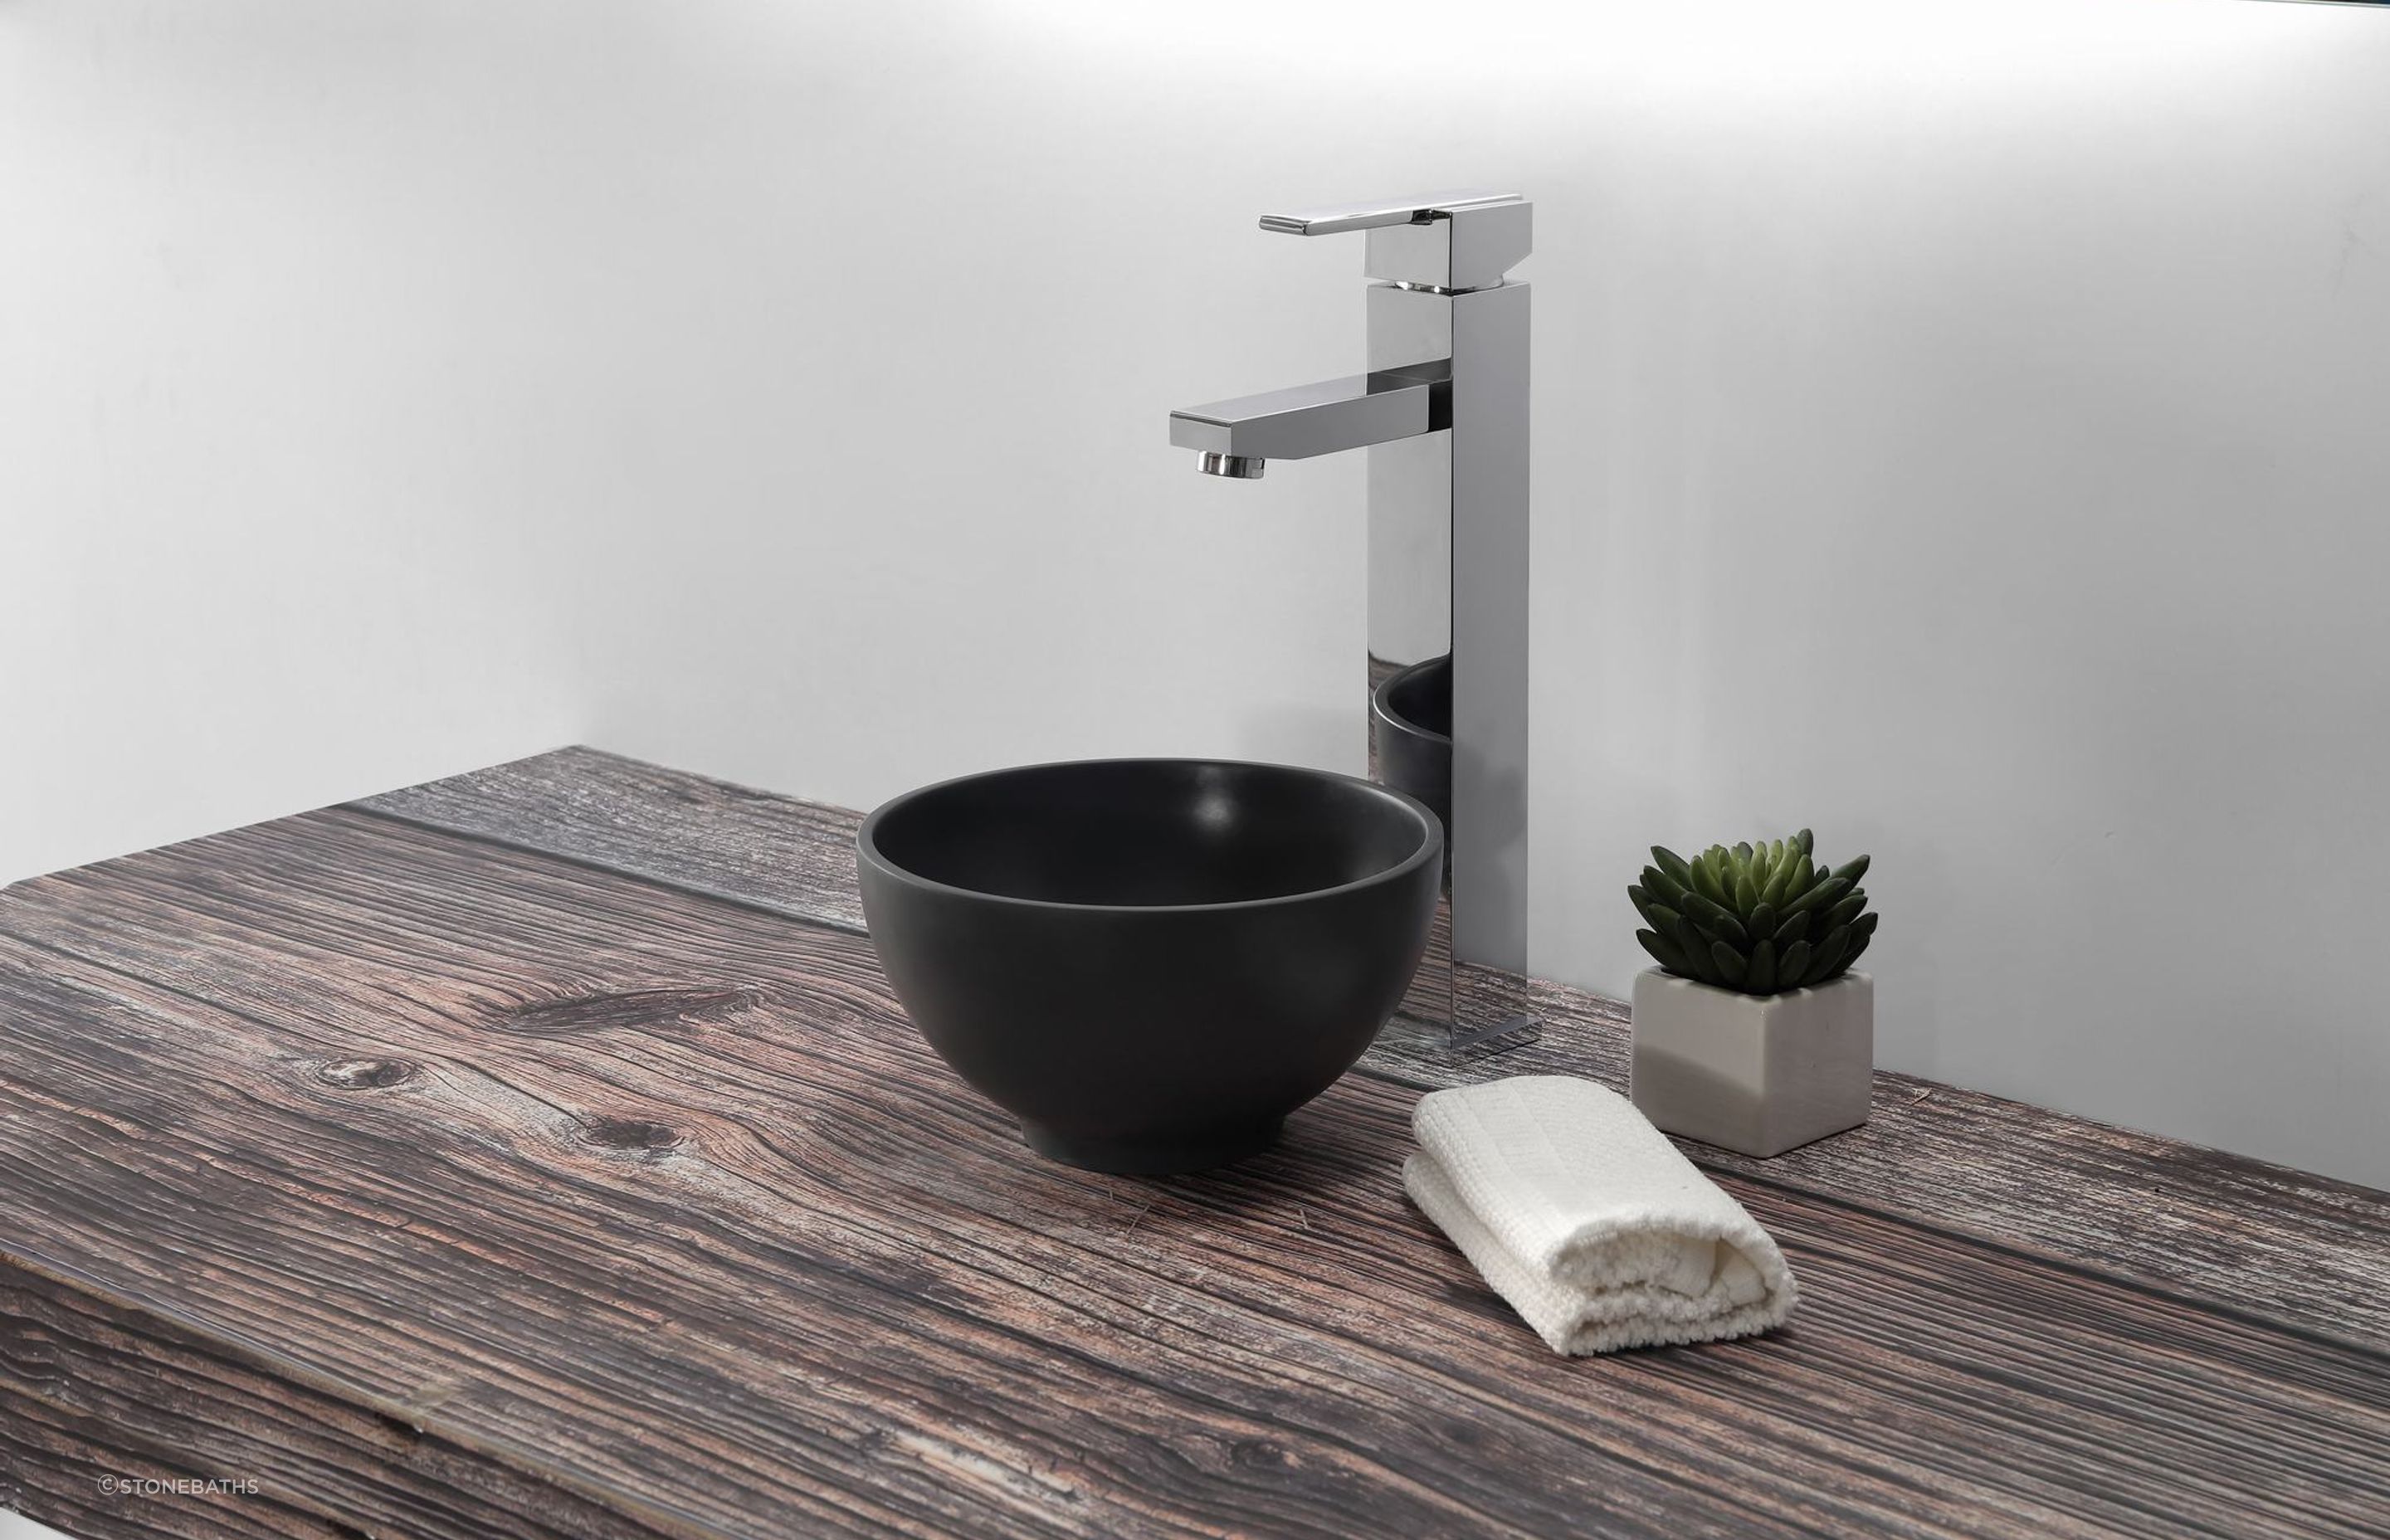 Effortlessly charming, the B1515-5 Round Basin is also perfect for small spaces